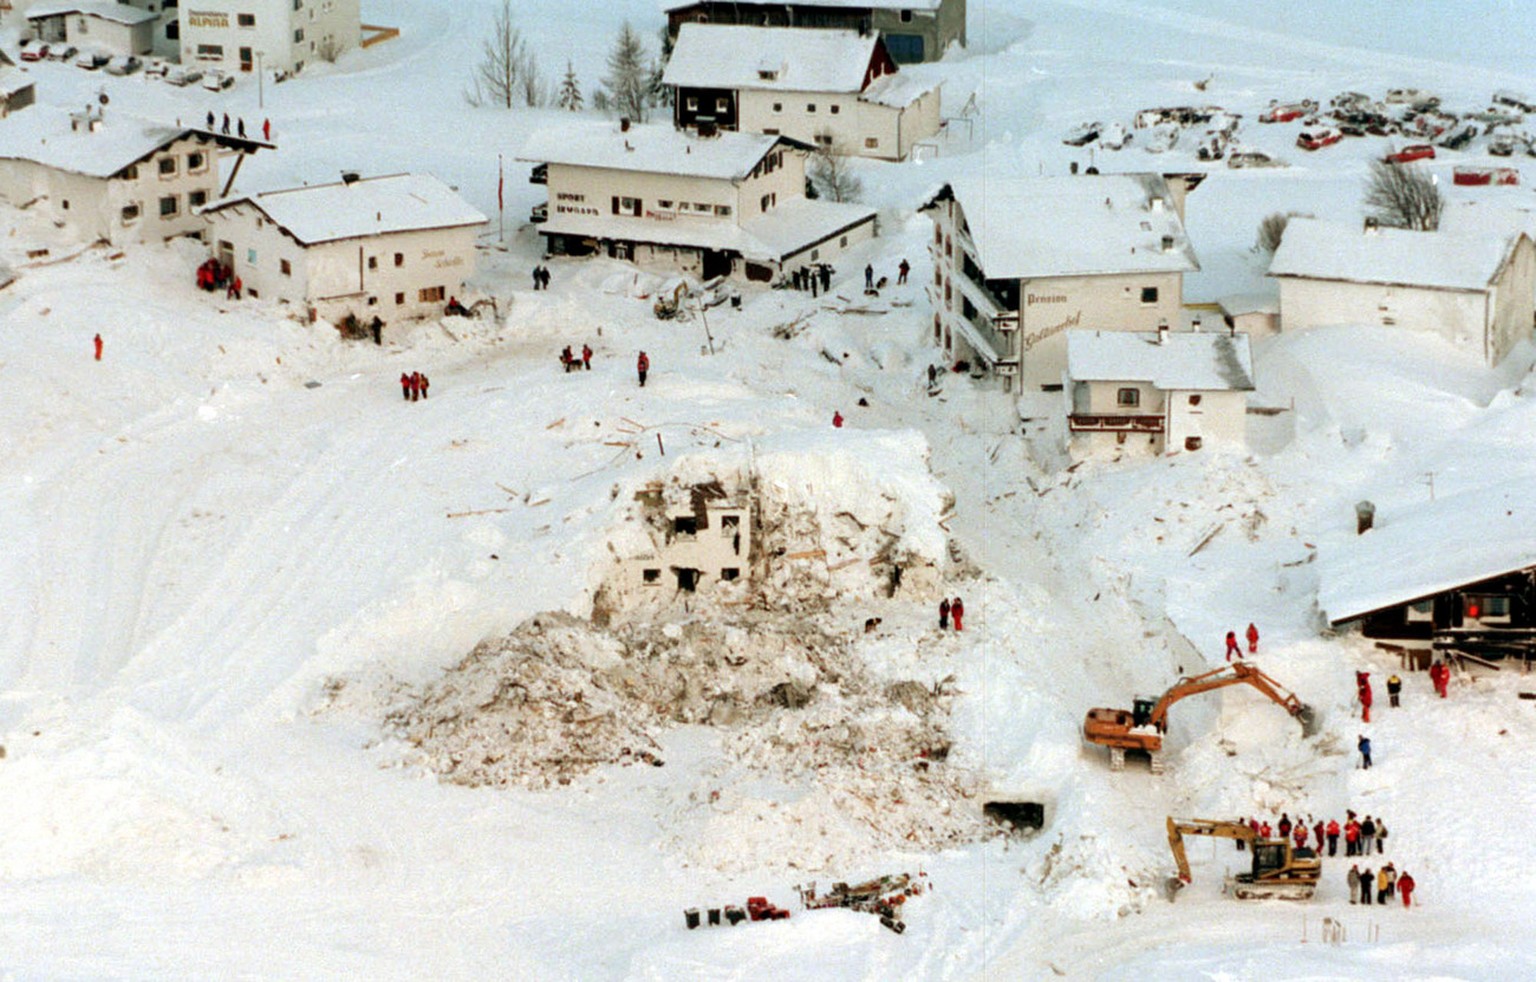 **FILE** Feb. 25 1999 file picture provided by the Austrian defense ministry shows an overal view of the rescue works, which are going on in Galtuer, Austria, after a fatal avalanche hit the skiing re ...